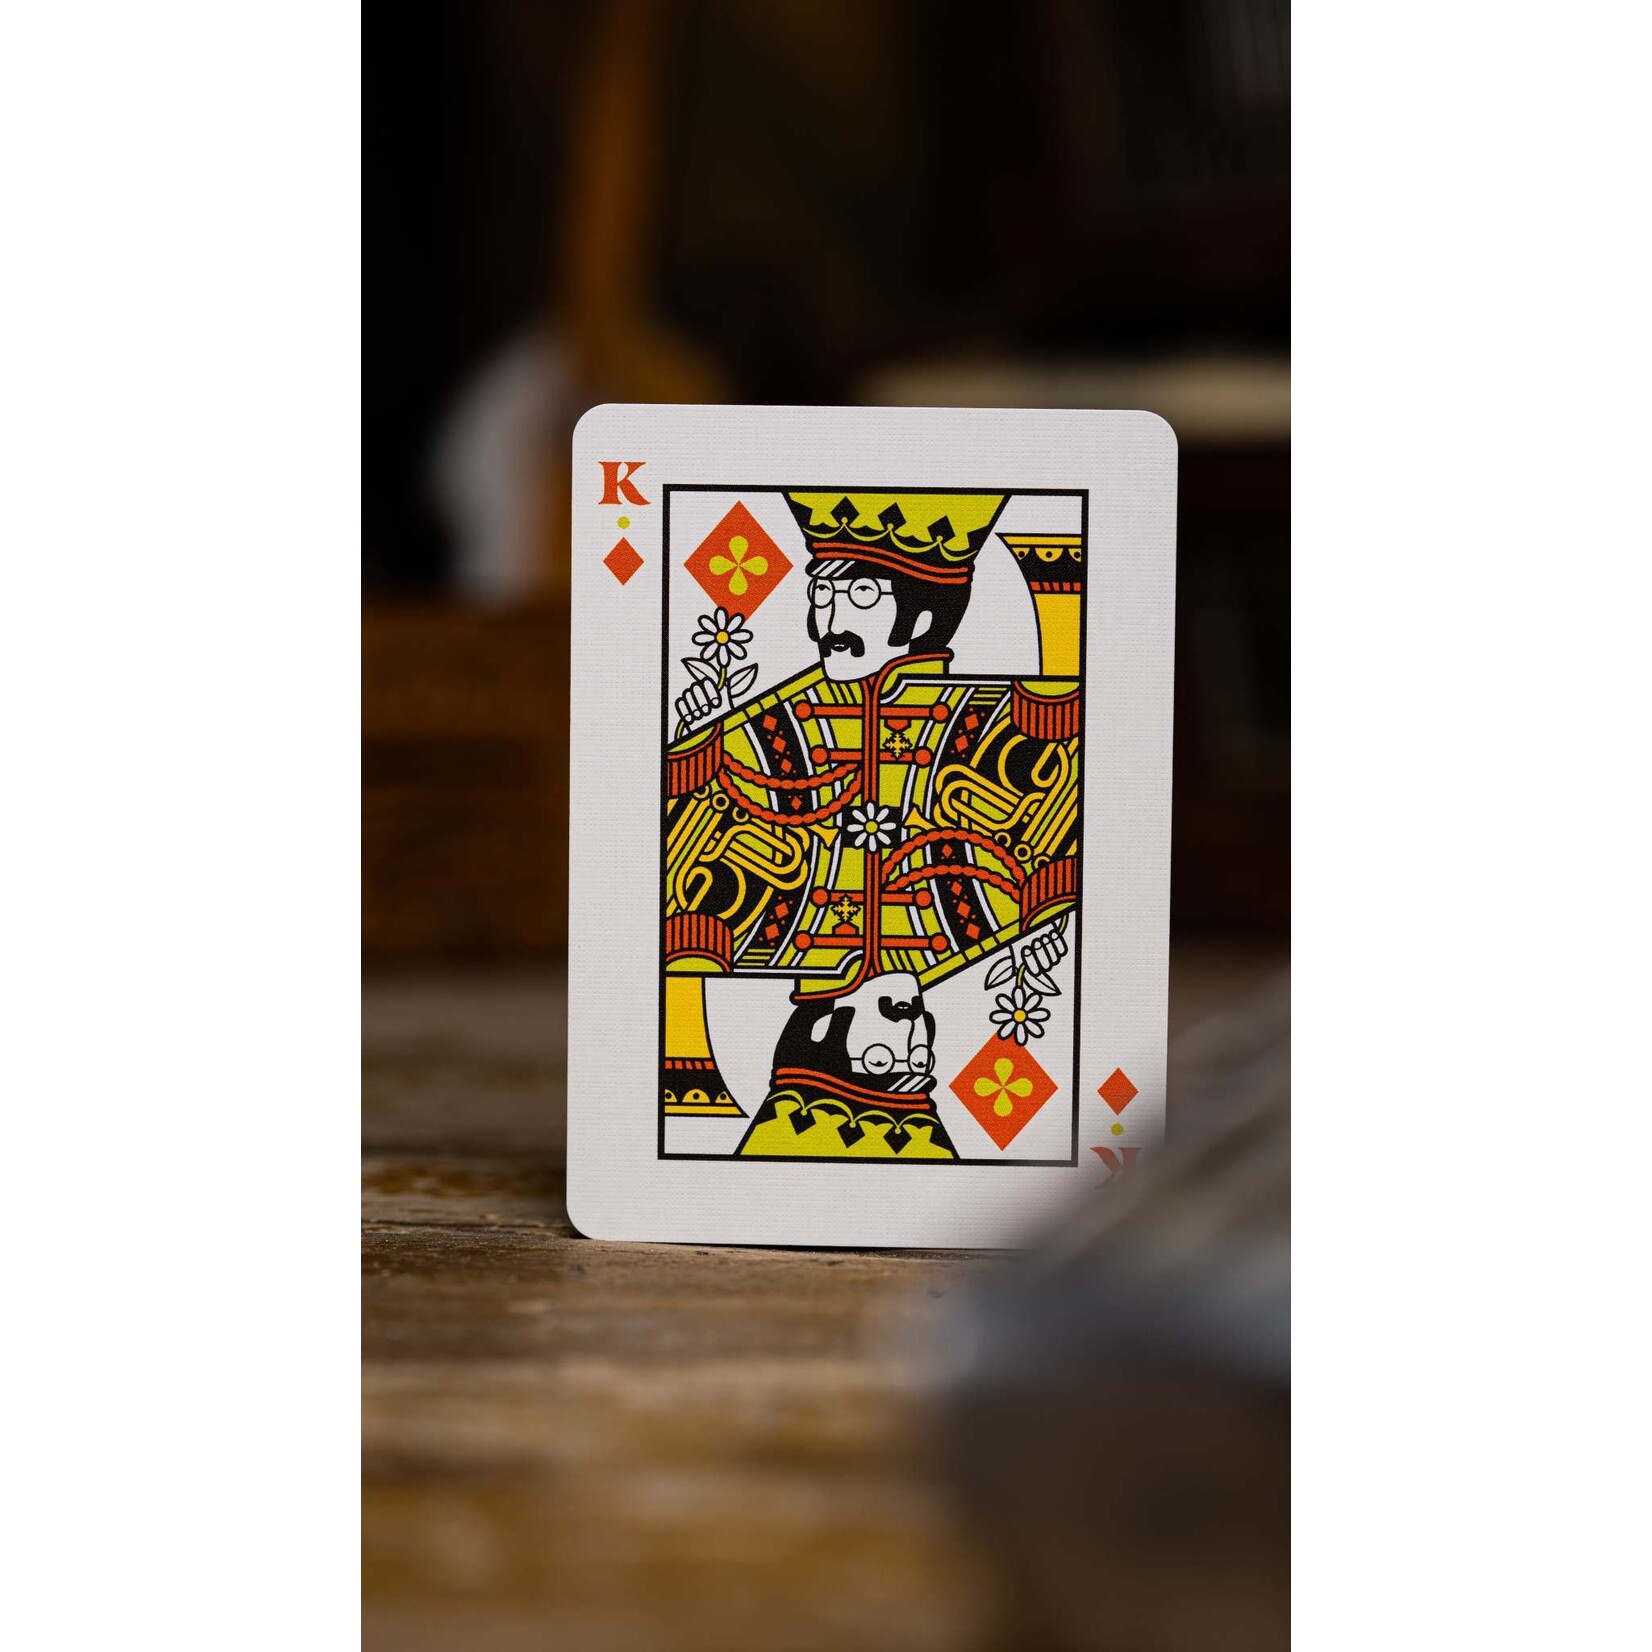 theory11 Beatles Playing Cards (blue)